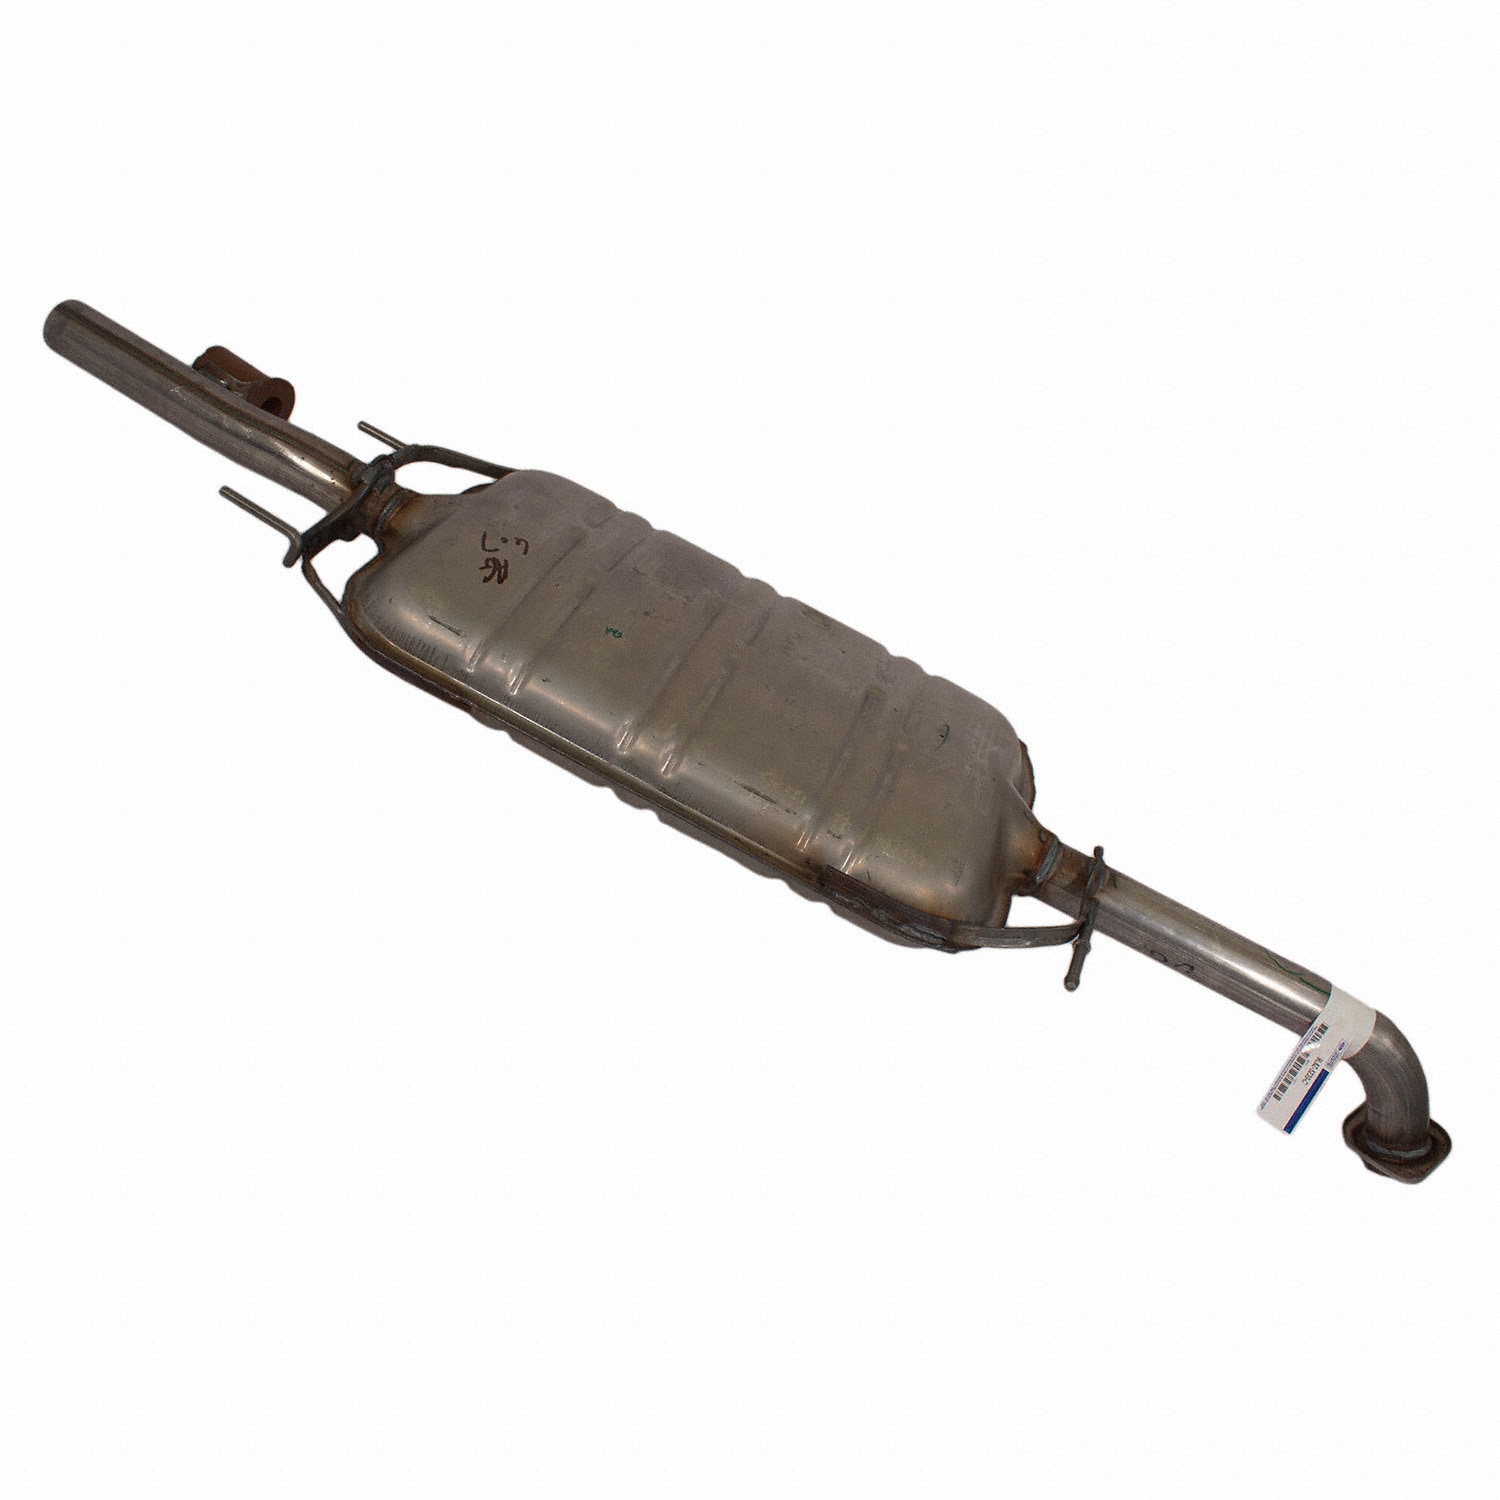 Ford® Motorcraft® Exhaust System Parts – Mufflers : FordParts.com